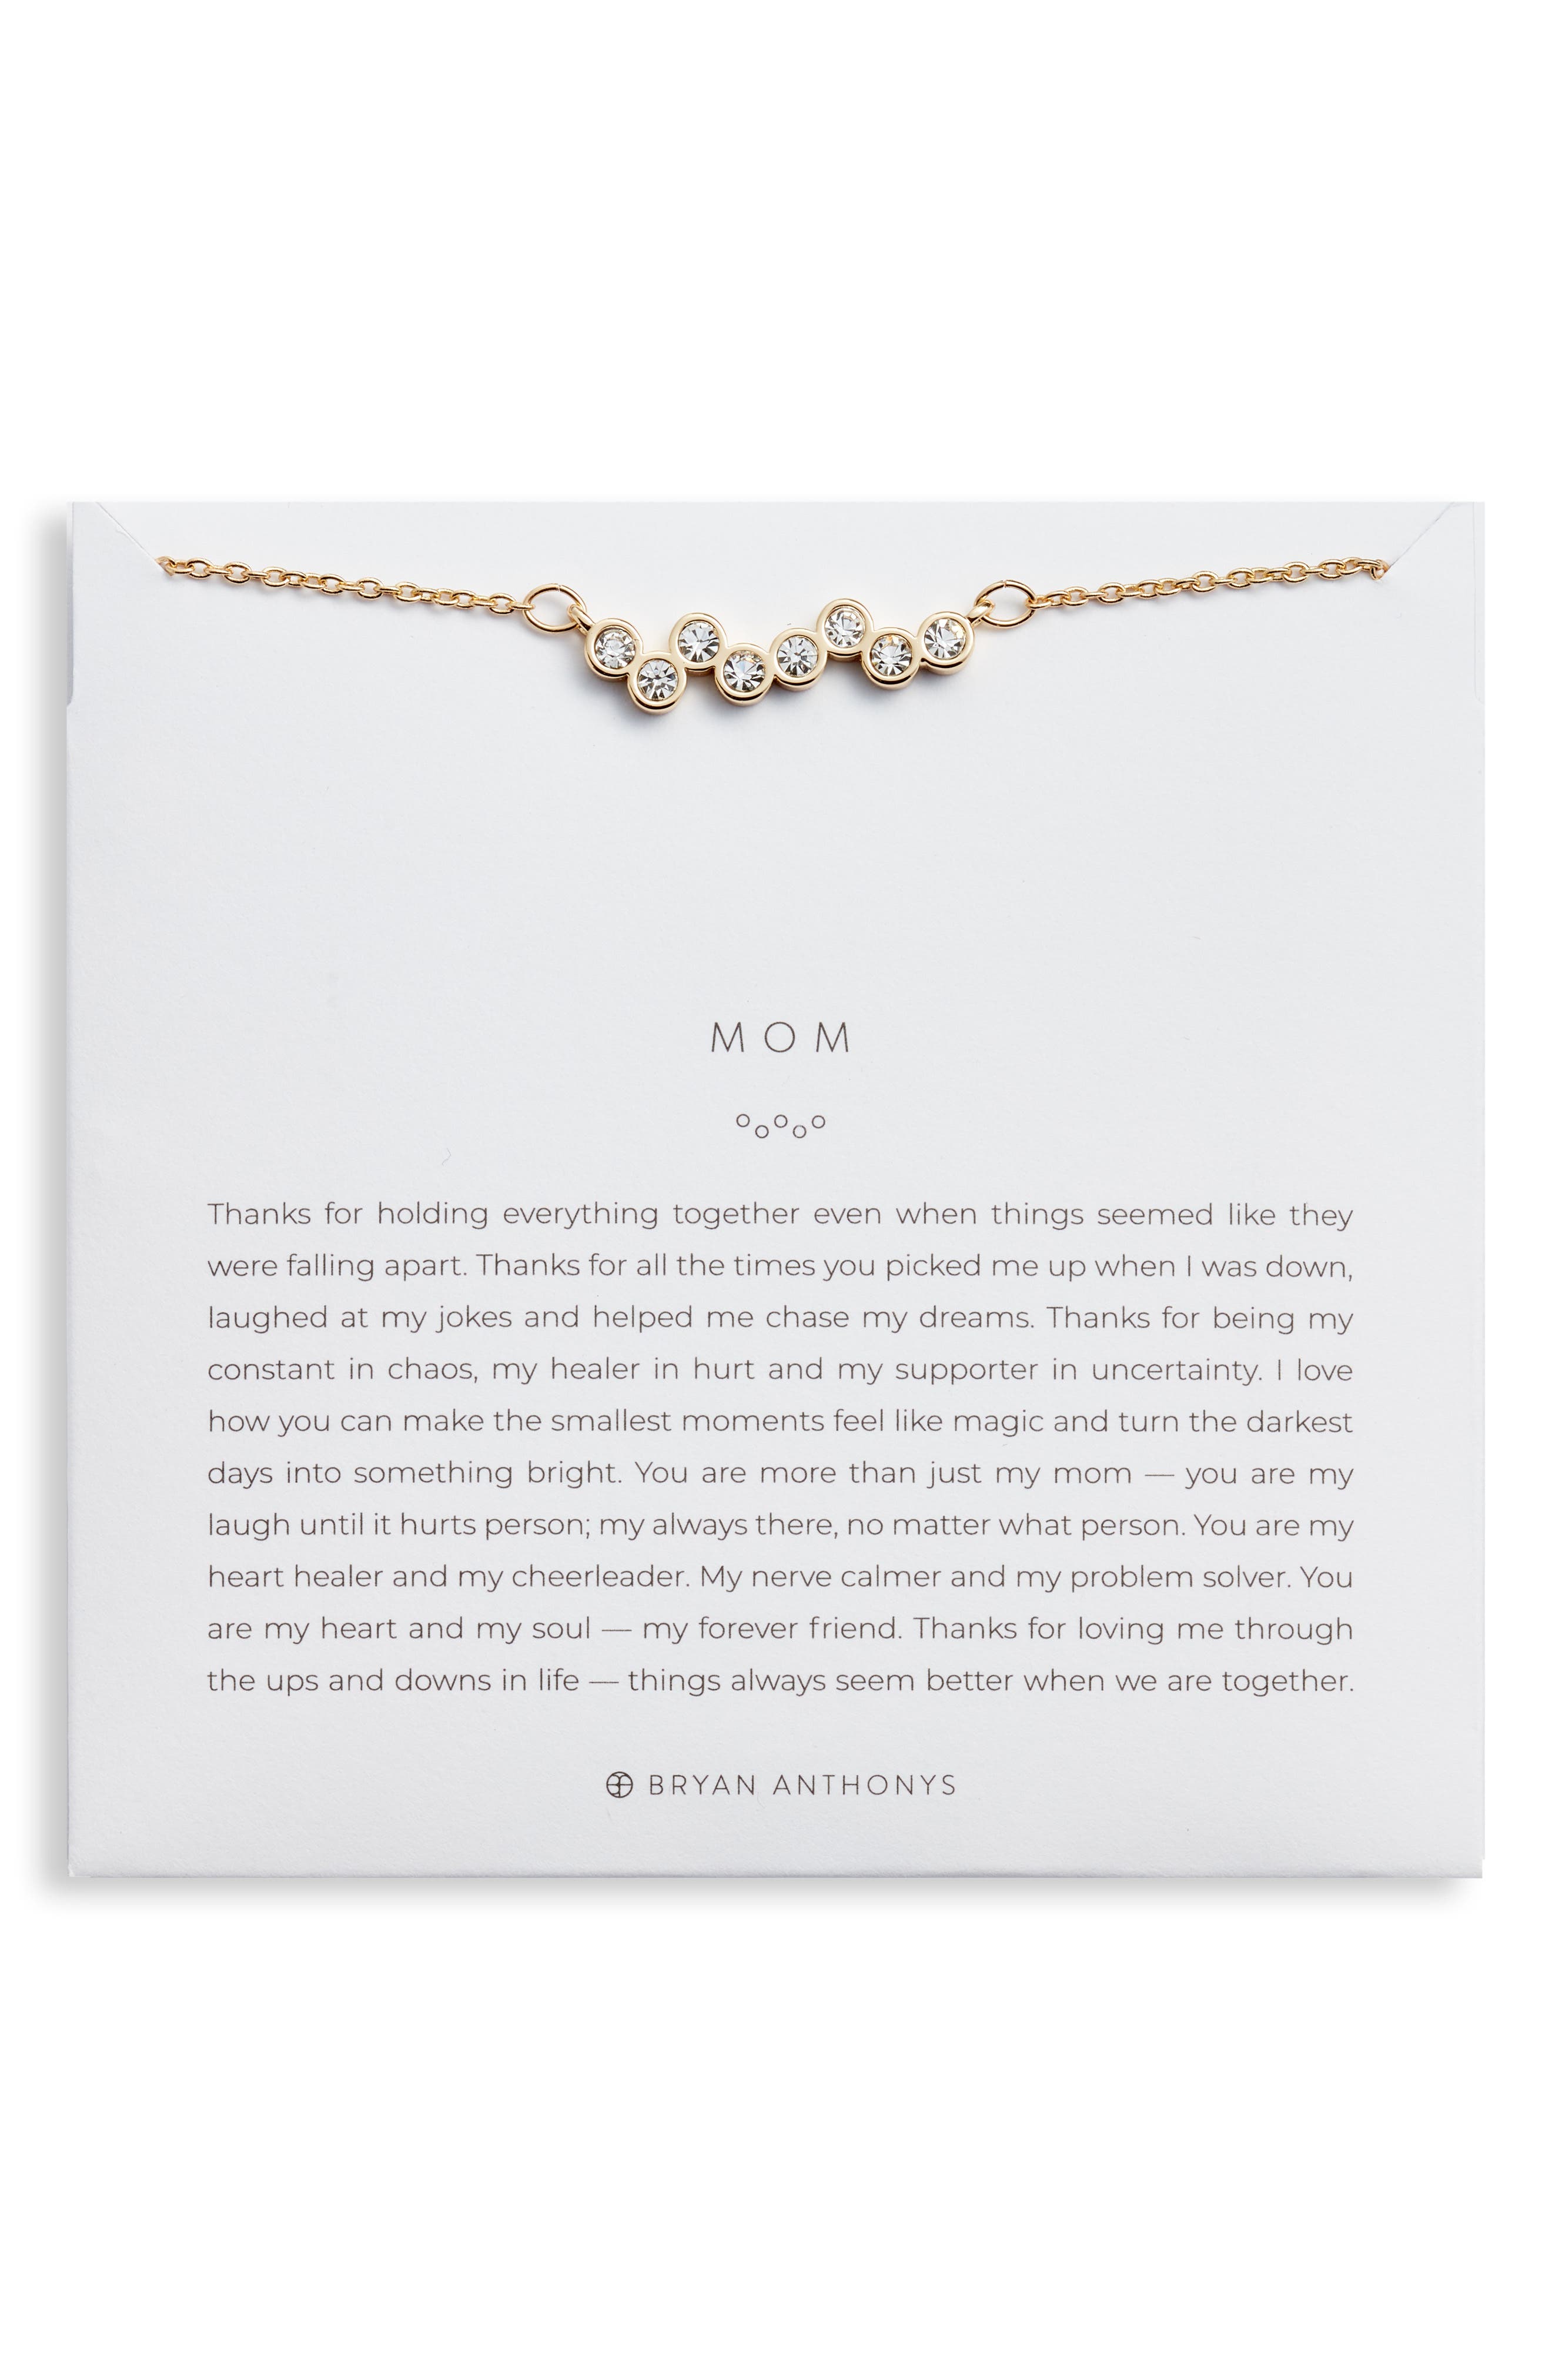 Bryan Anthonys Mom Crystal Necklace in 14K Gold at Nordstrom